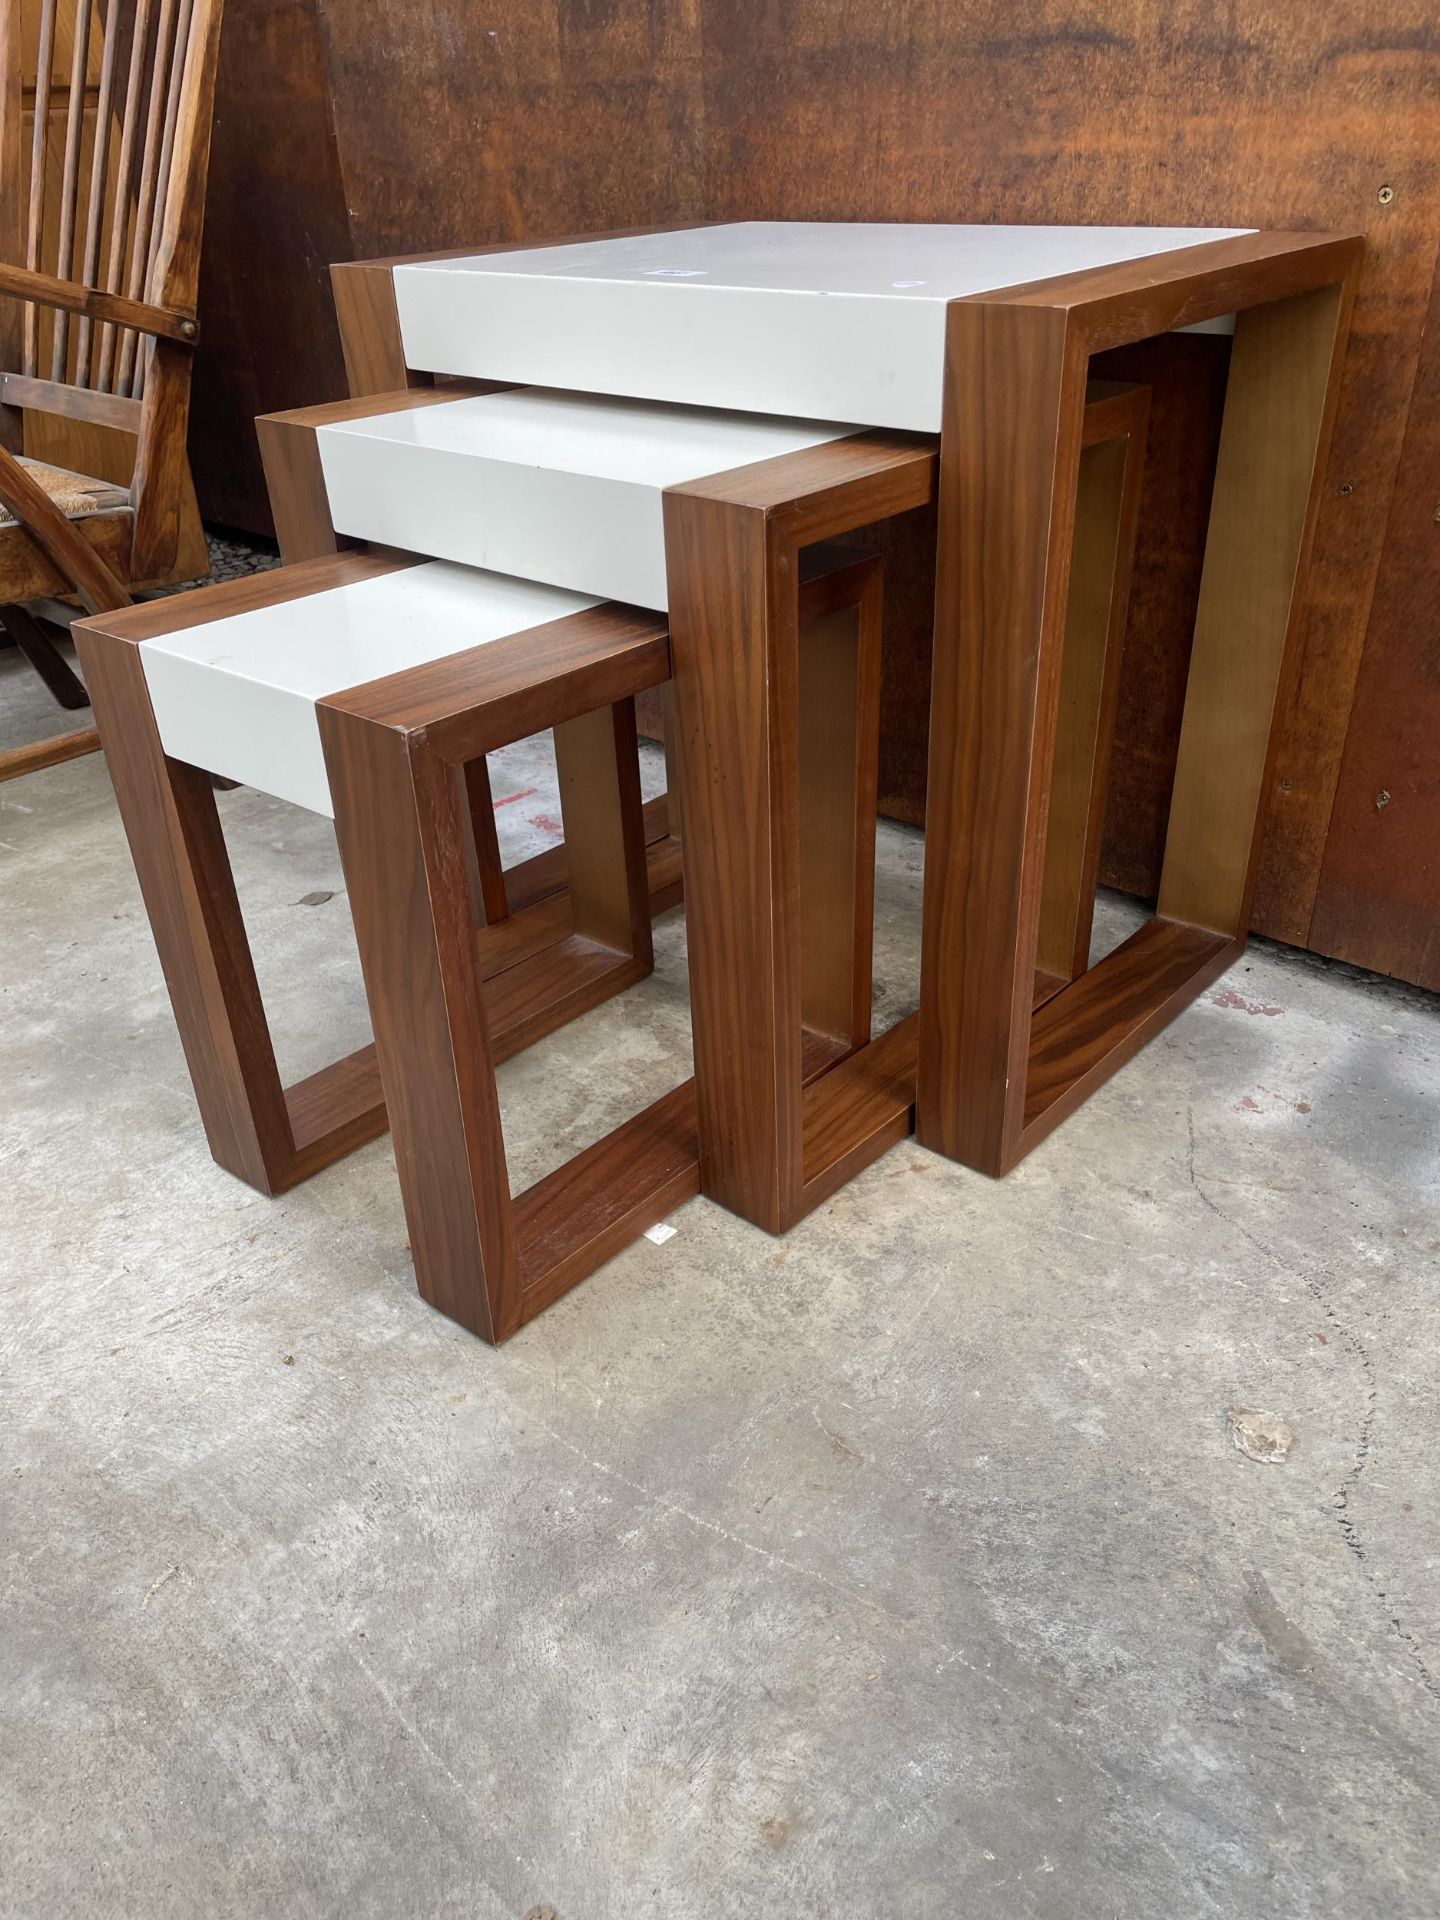 A RETRO TEAK AND MELAMINE NEST OF THREE TABLES - Image 2 of 3